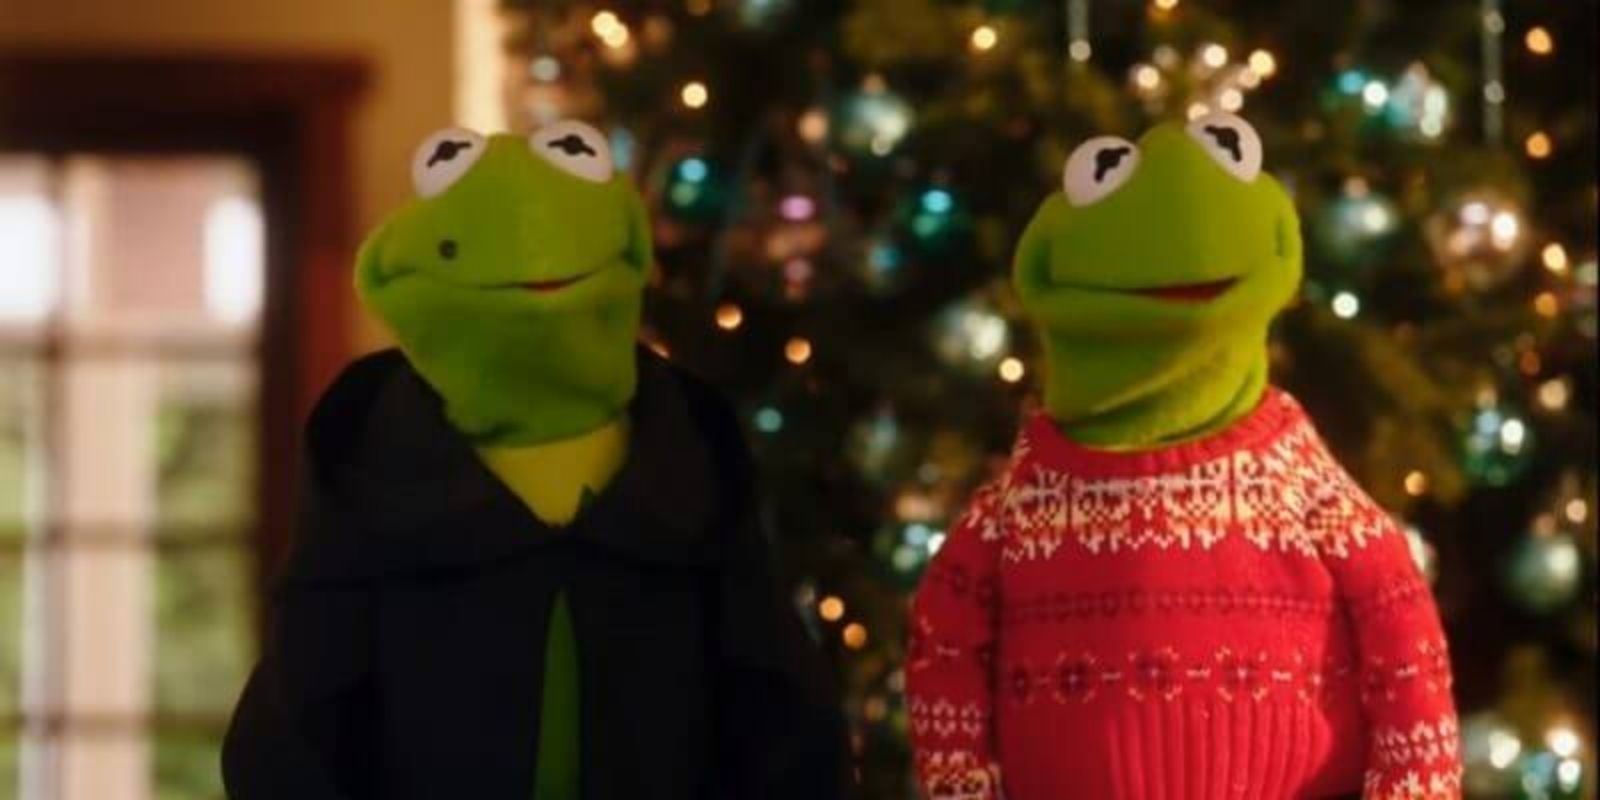 10 Other Christmas Stories The Muppets Could Adapt For Disney+